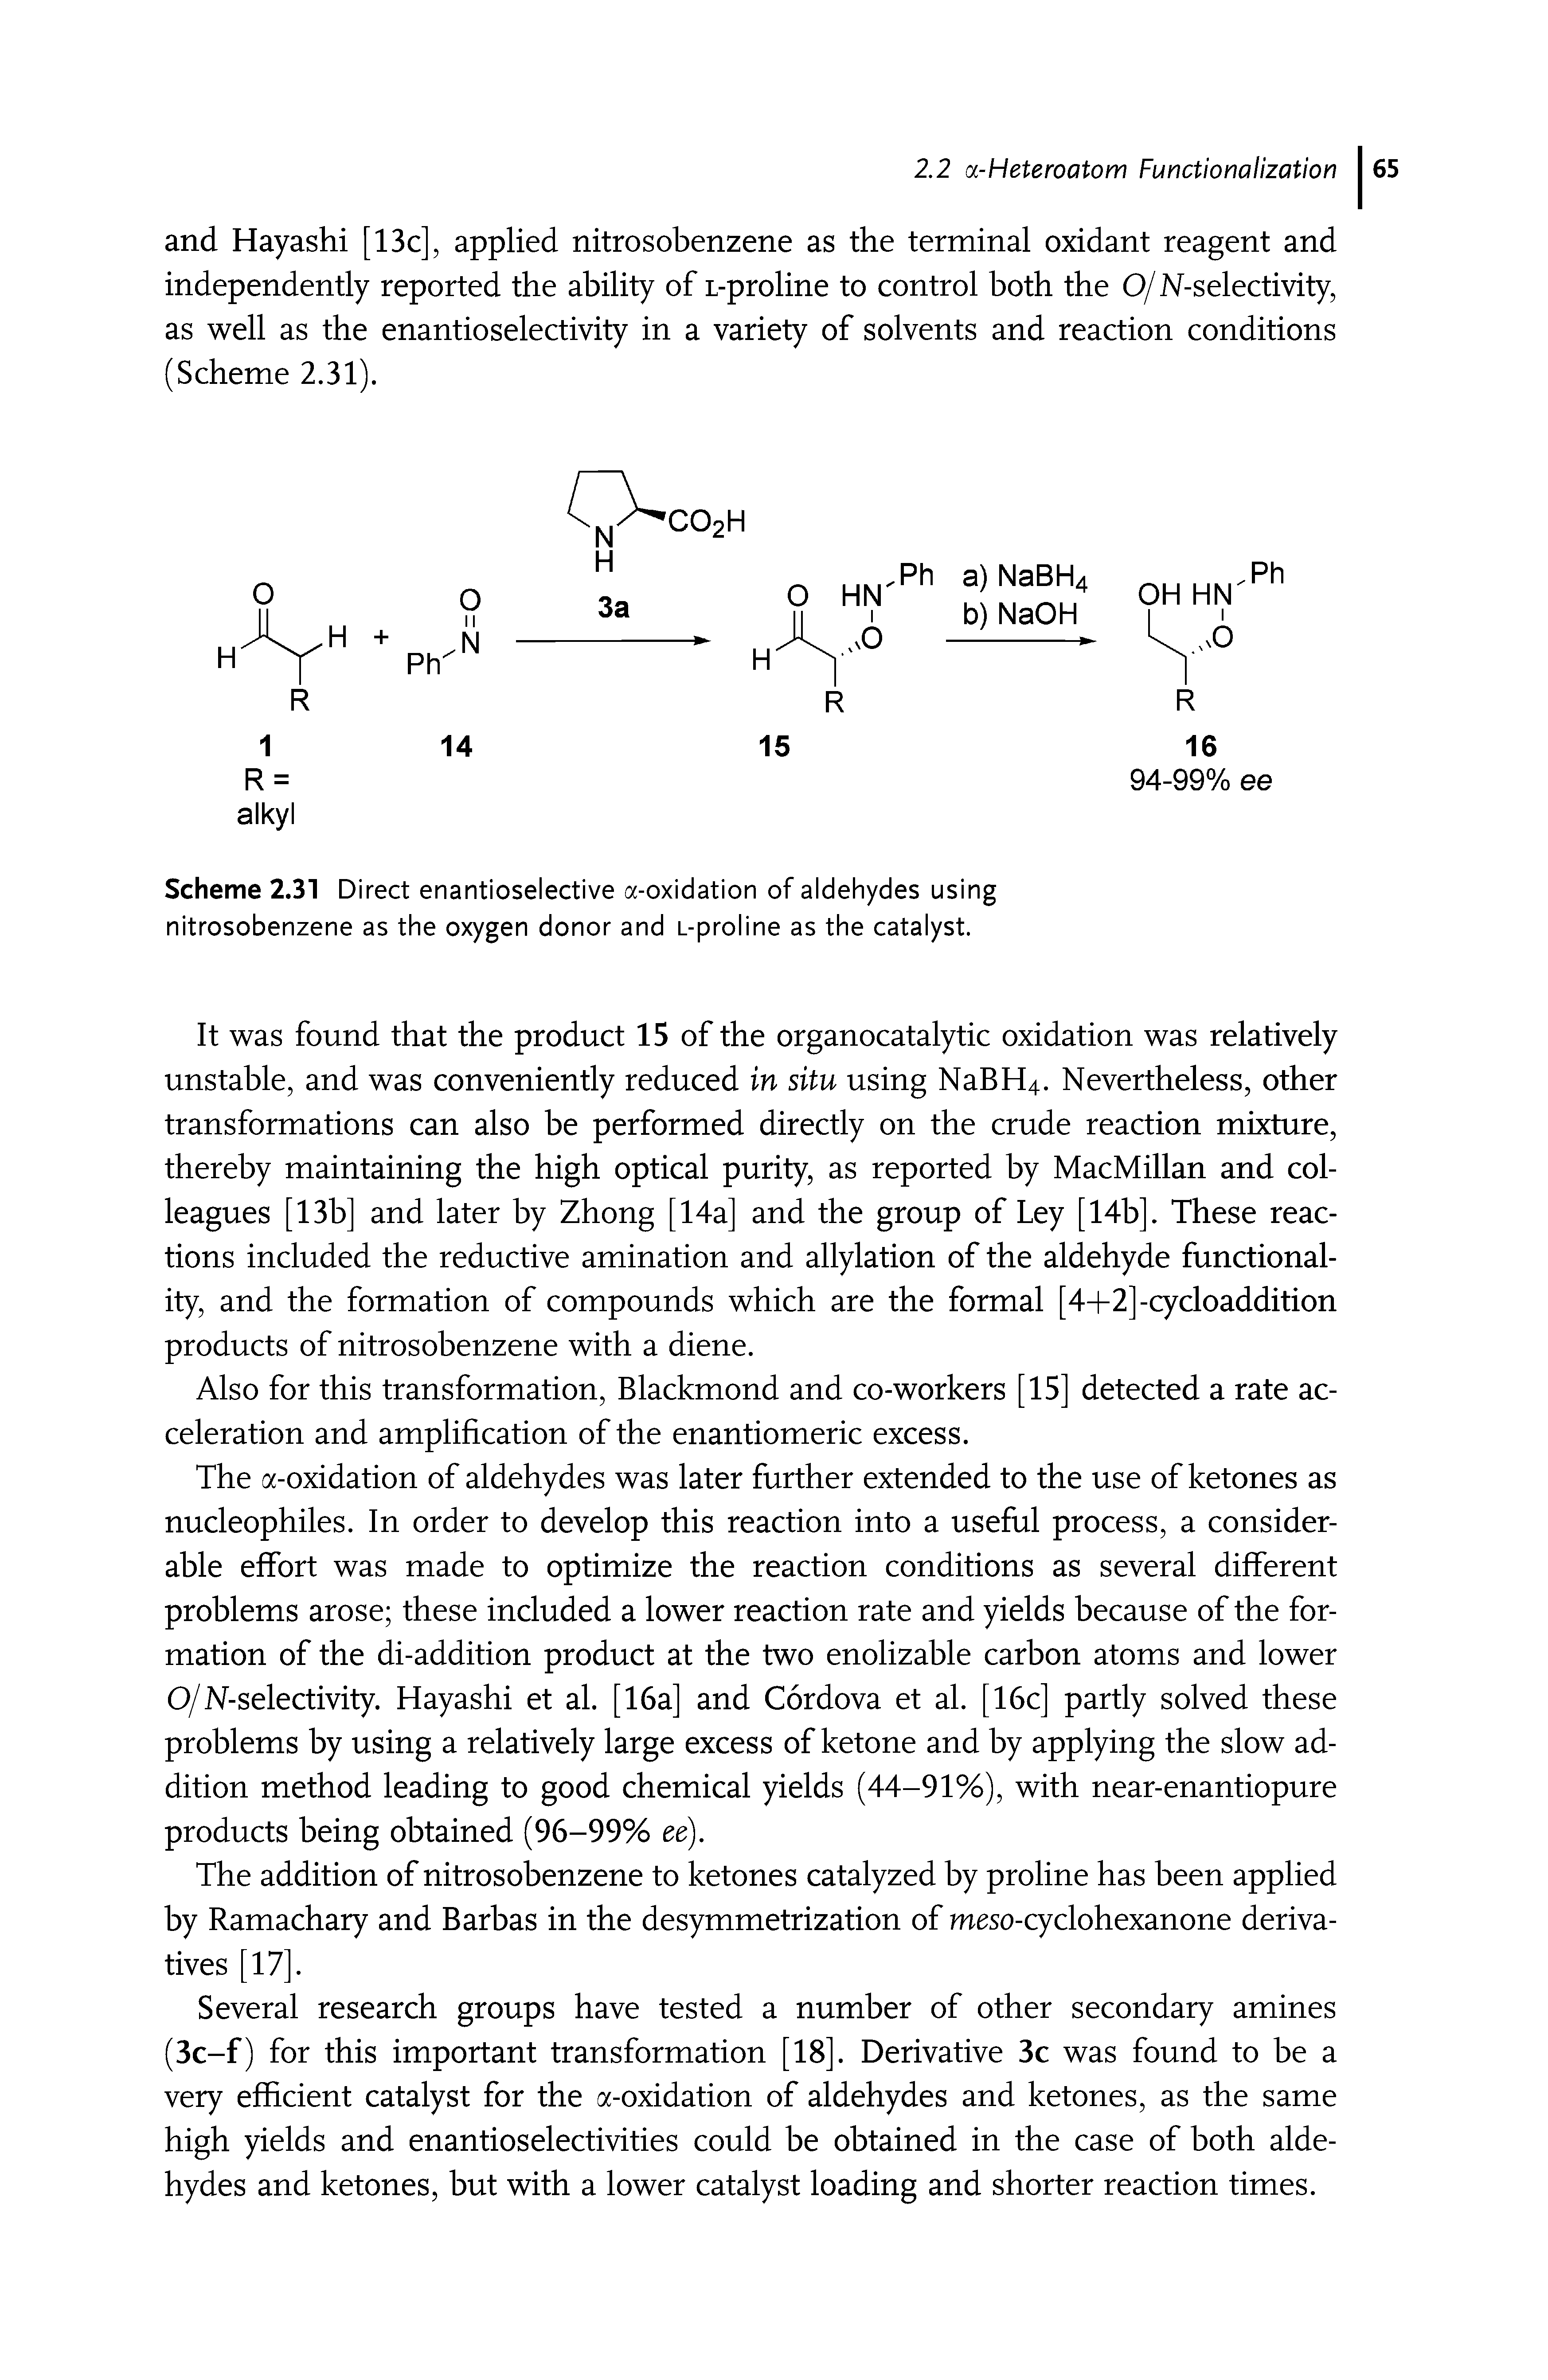 Scheme 2.31 Direct enantioselective a-oxidation of aldehydes using nitrosobenzene as the oxygen donor and L-proline as the catalyst.